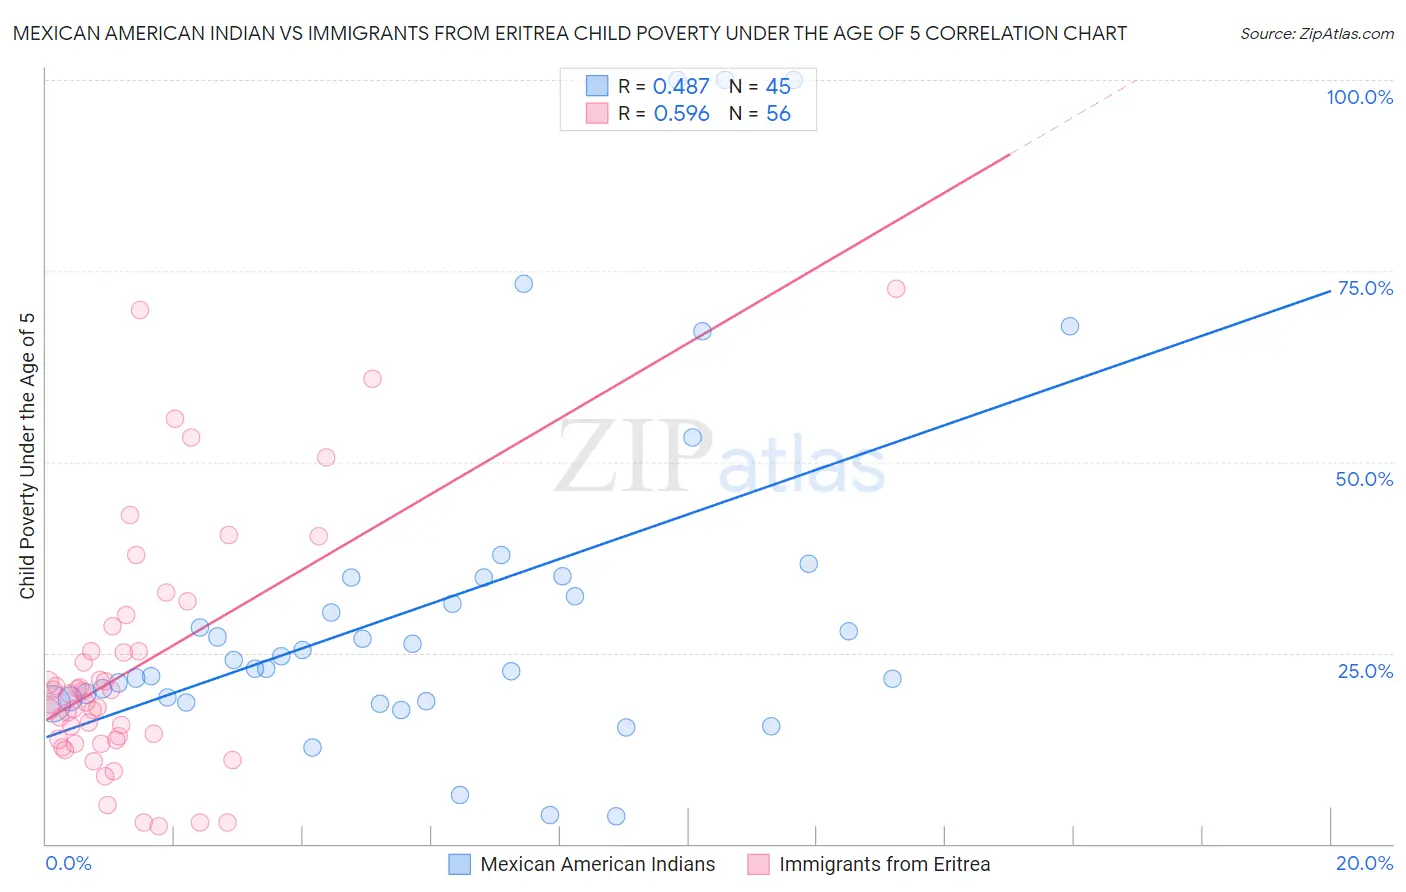 Mexican American Indian vs Immigrants from Eritrea Child Poverty Under the Age of 5